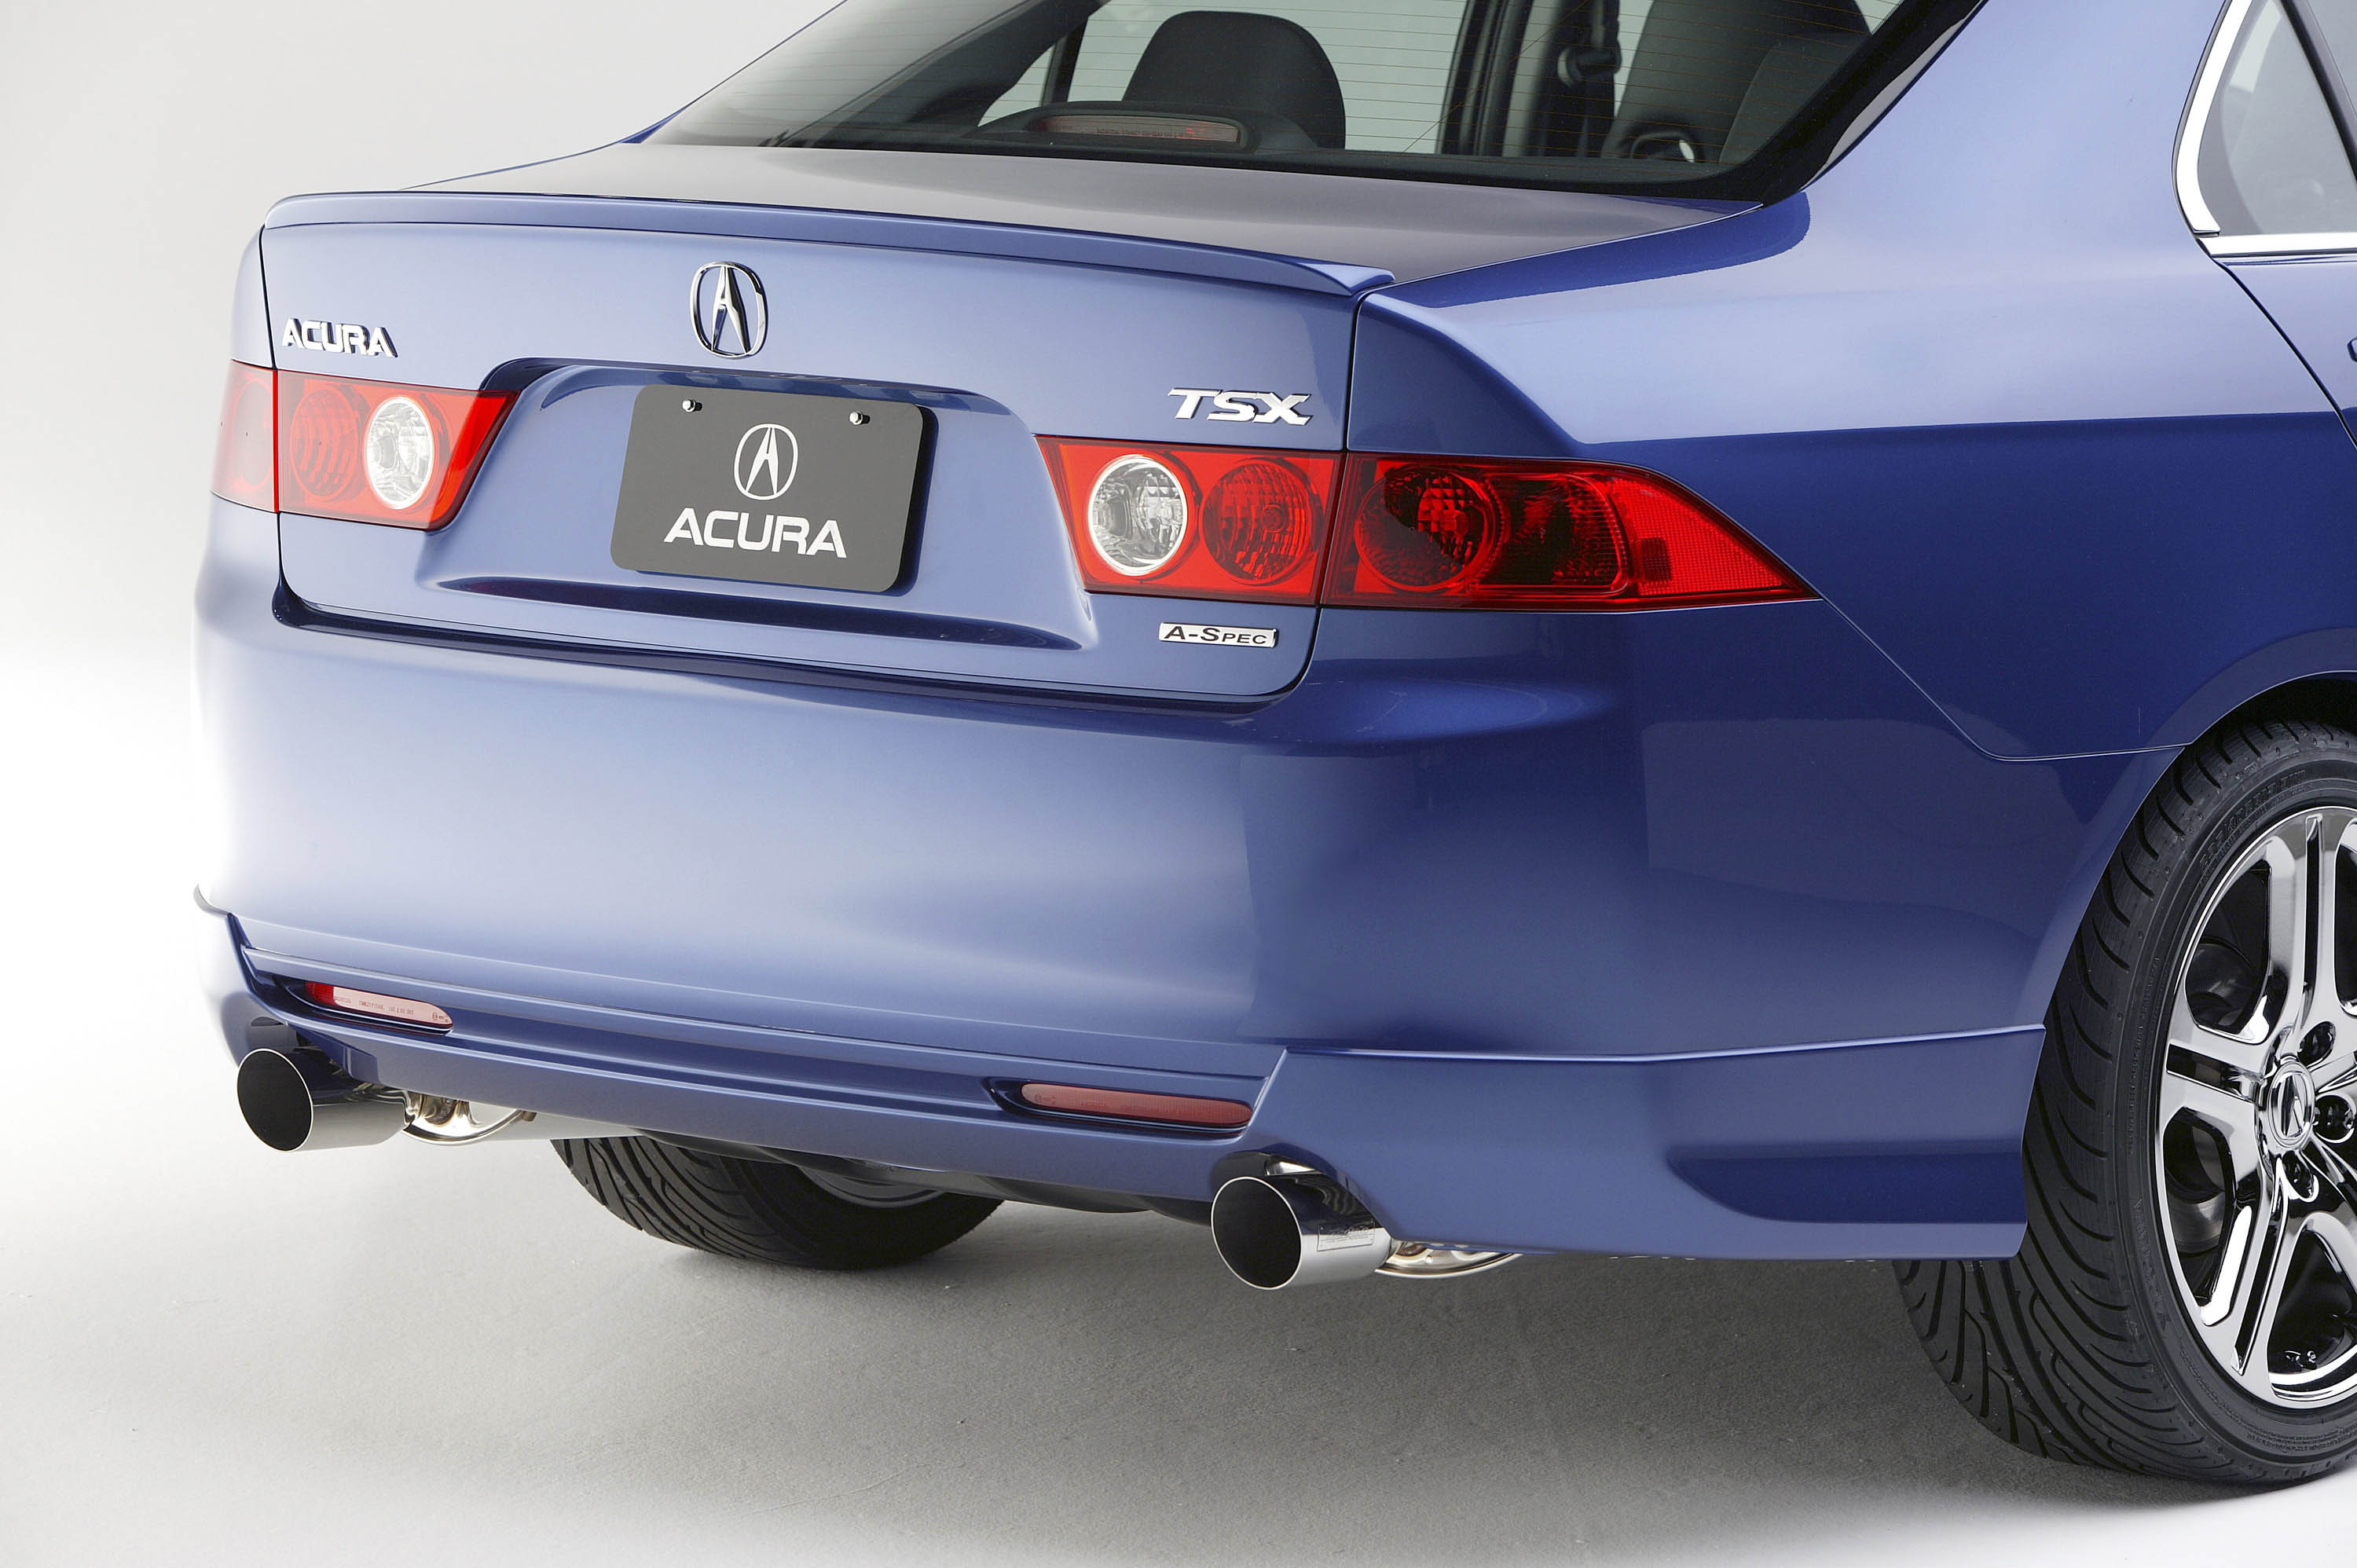 Acura Tsx A-Spec Concept Wallpapers